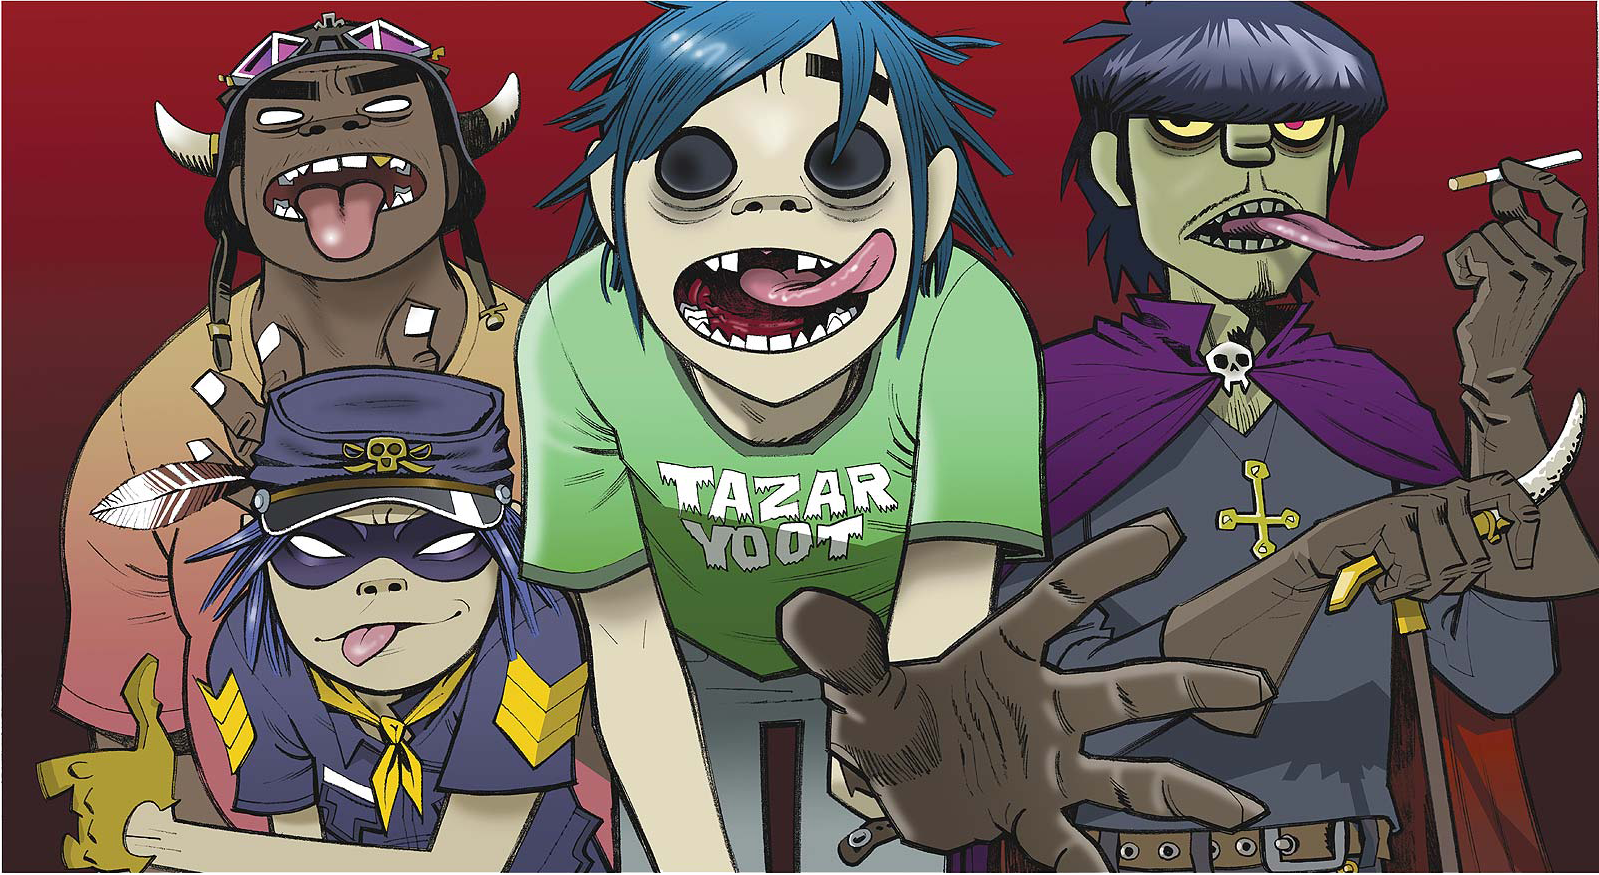 gorillaz-are-coming-back-with-a-2017-album-and-we-feel-good-01.png